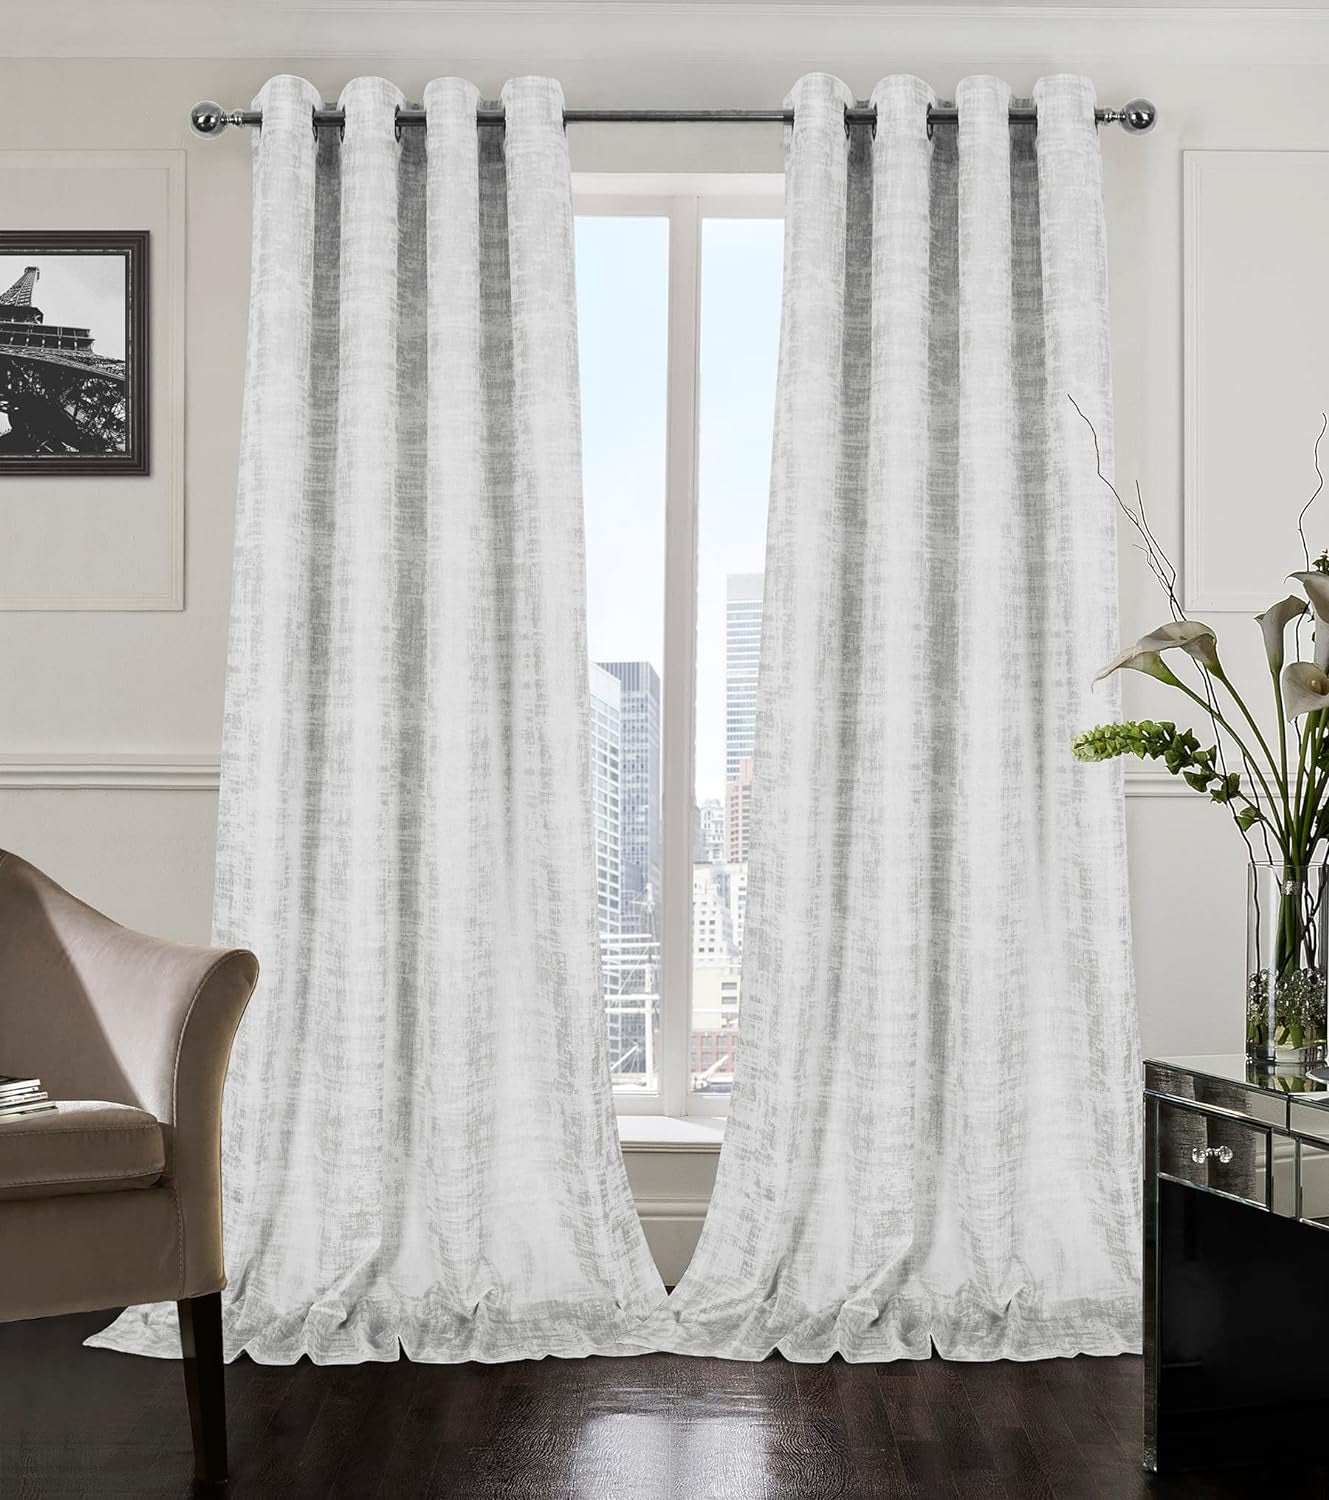 Always4U Soft Velvet Curtains 95 Inch Length Luxury Bedroom Curtains Gold Foil Print Window Curtains for Living Room 1 Panel White  always4u White (Silver Print) 1 Panel: 45''W*108''L 